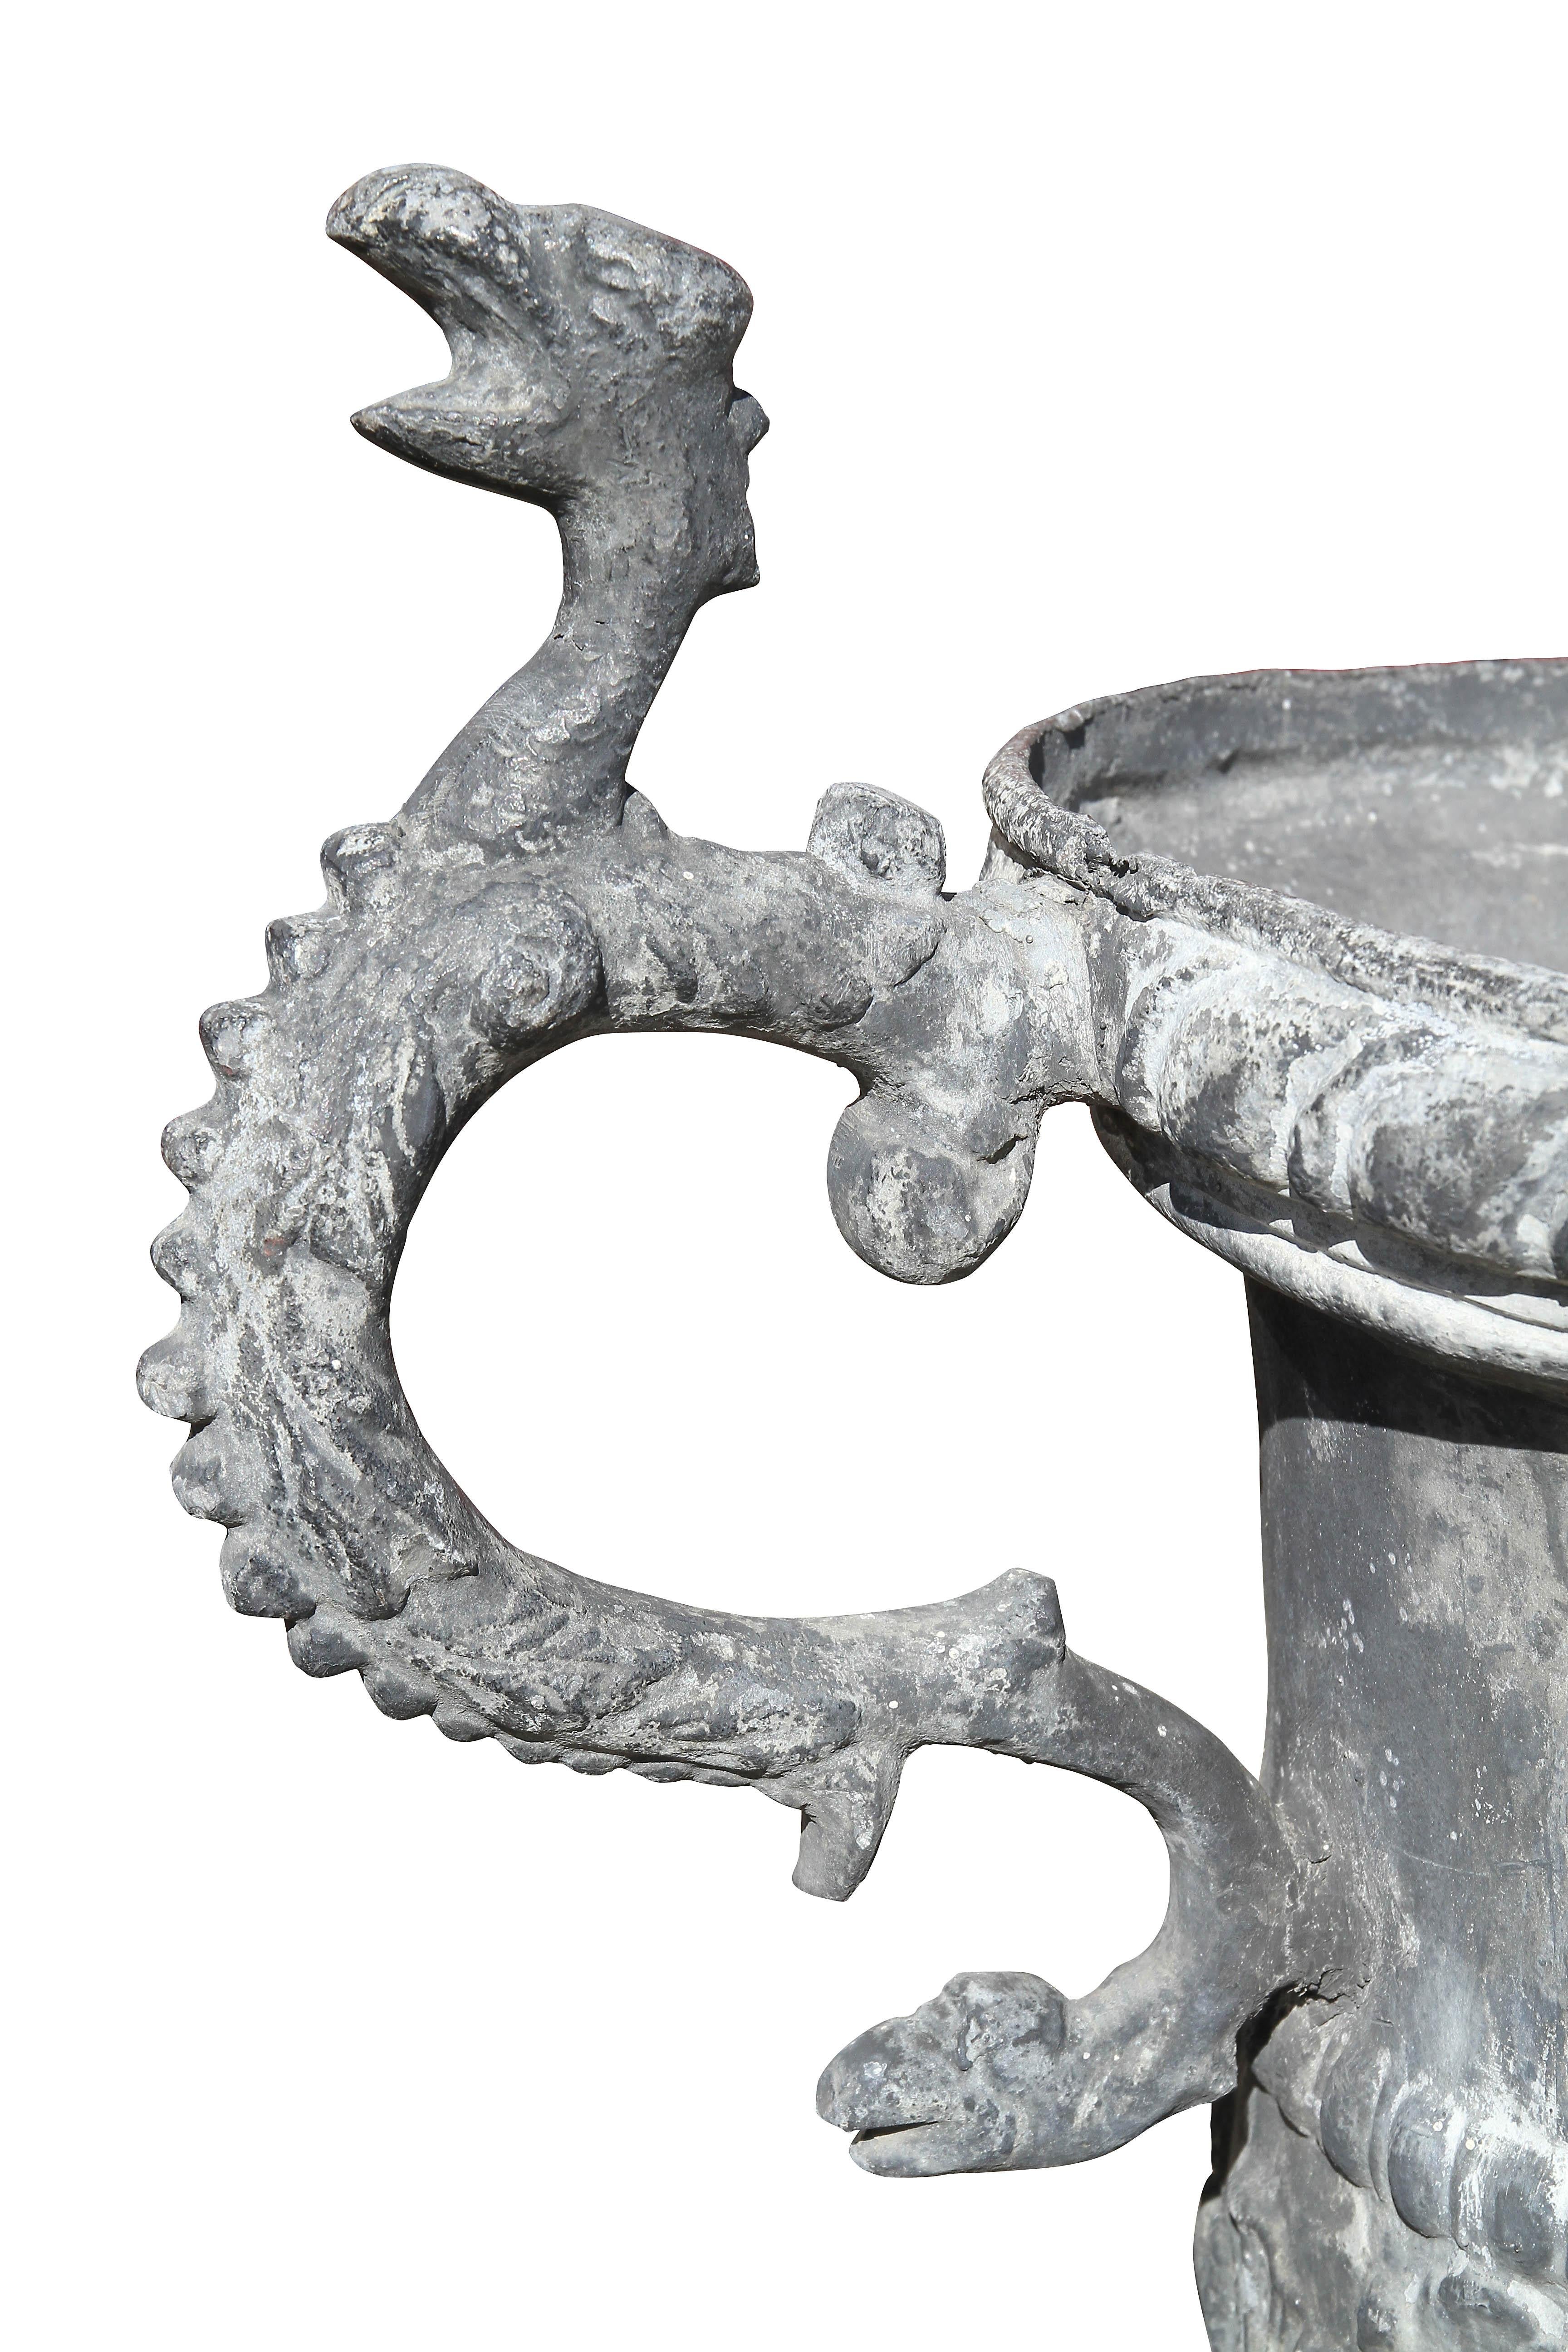 Each circular with gadrooned edge, cherub and leaf decoration, serpent handles, circular egg and dart base.